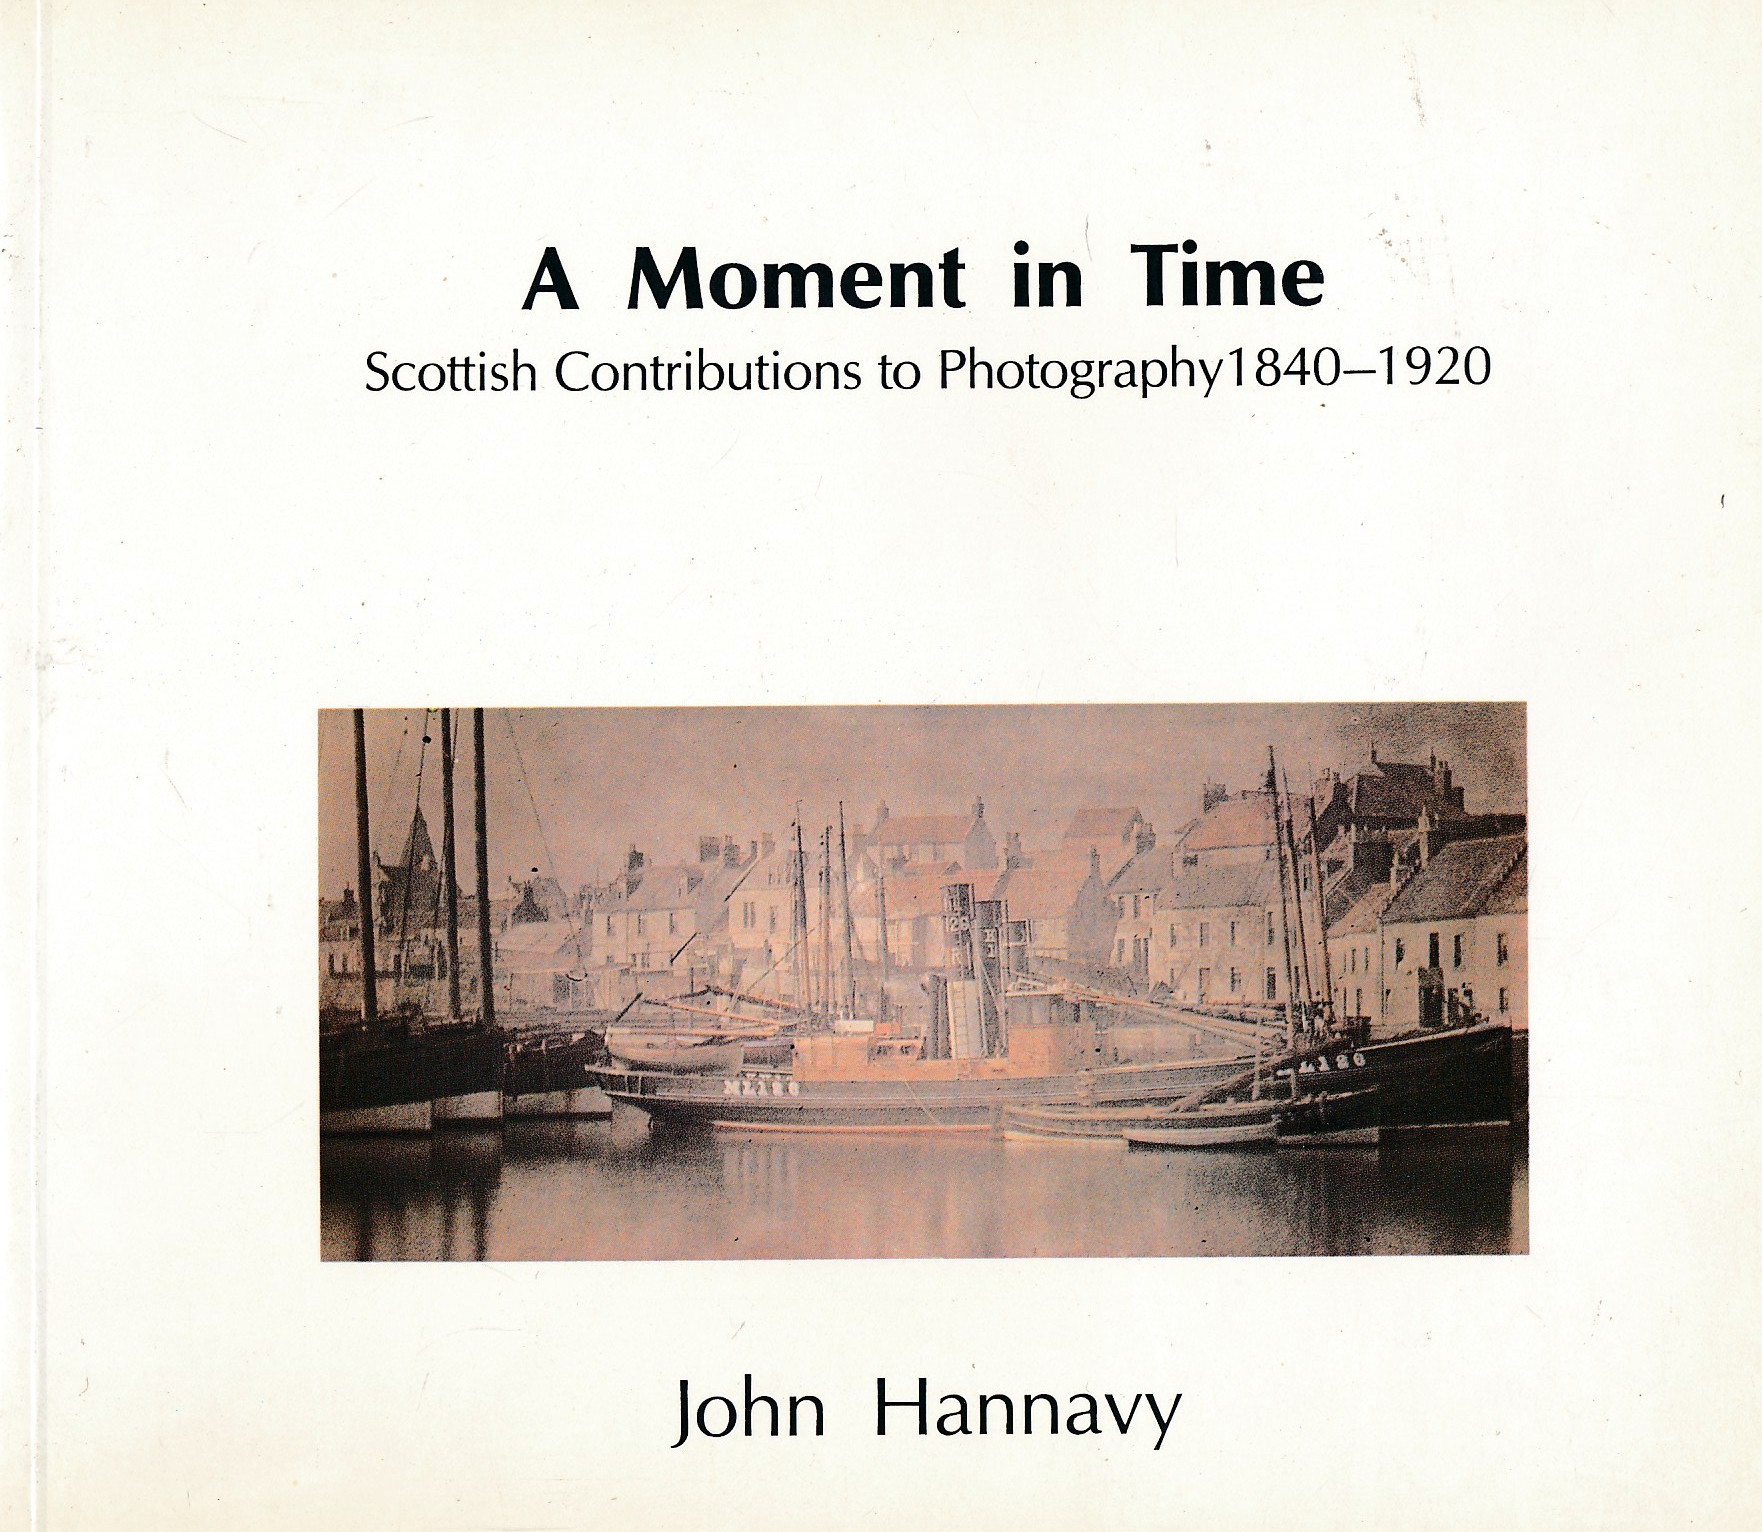 A Moment in Time. Scottish Contributions to Photography 1840 - 1920